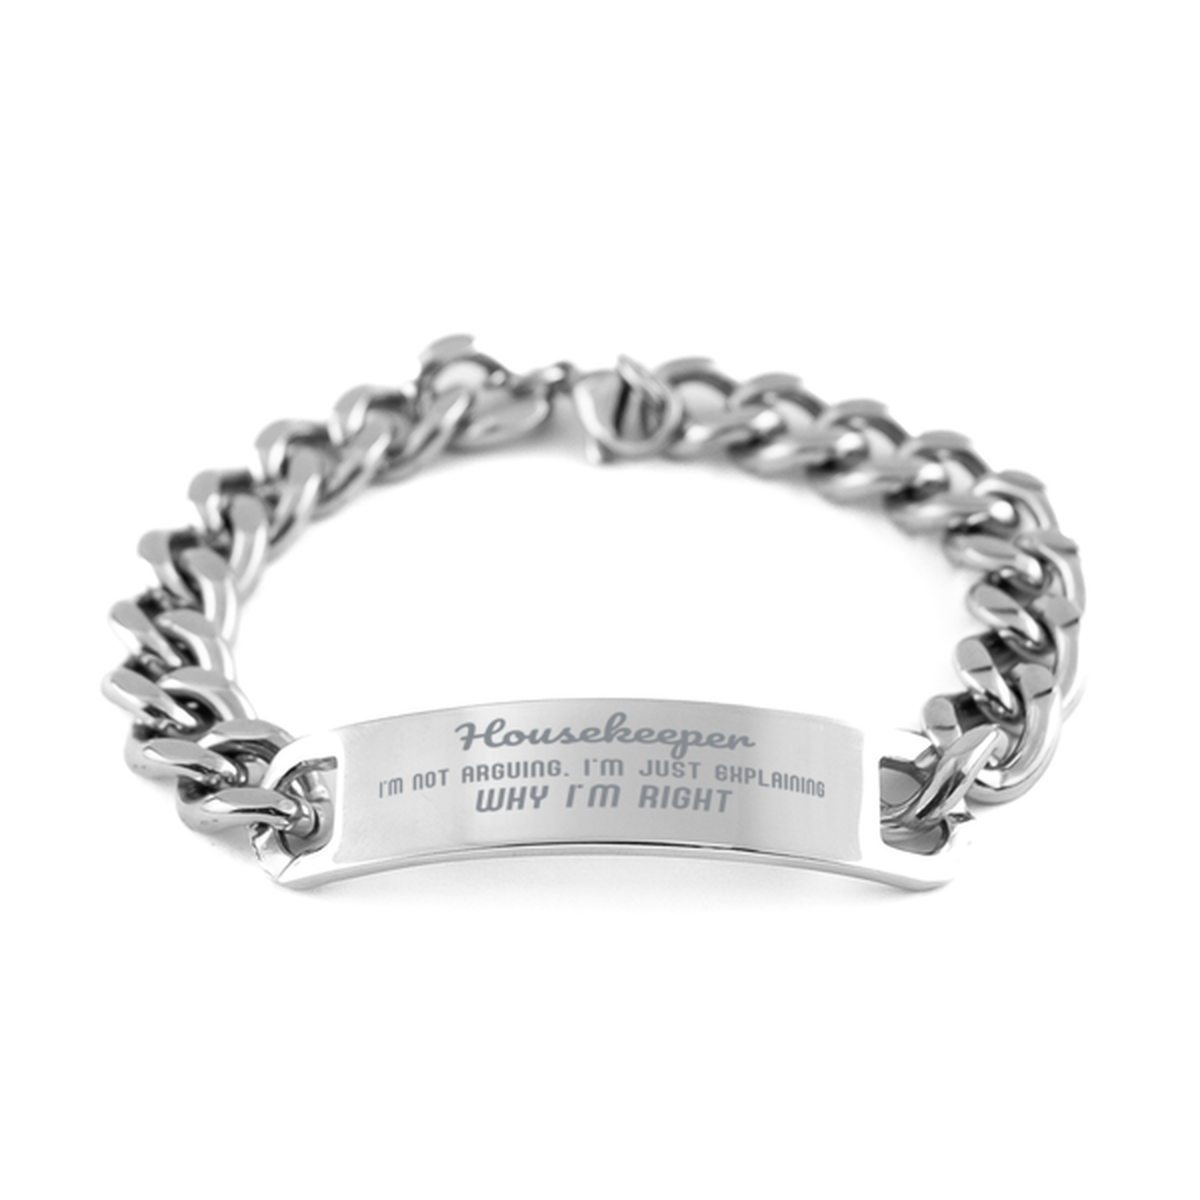 Housekeeper I'm not Arguing. I'm Just Explaining Why I'm RIGHT Cuban Chain Stainless Steel Bracelet, Graduation Birthday Christmas Housekeeper Gifts For Housekeeper Funny Saying Quote Present for Men Women Coworker